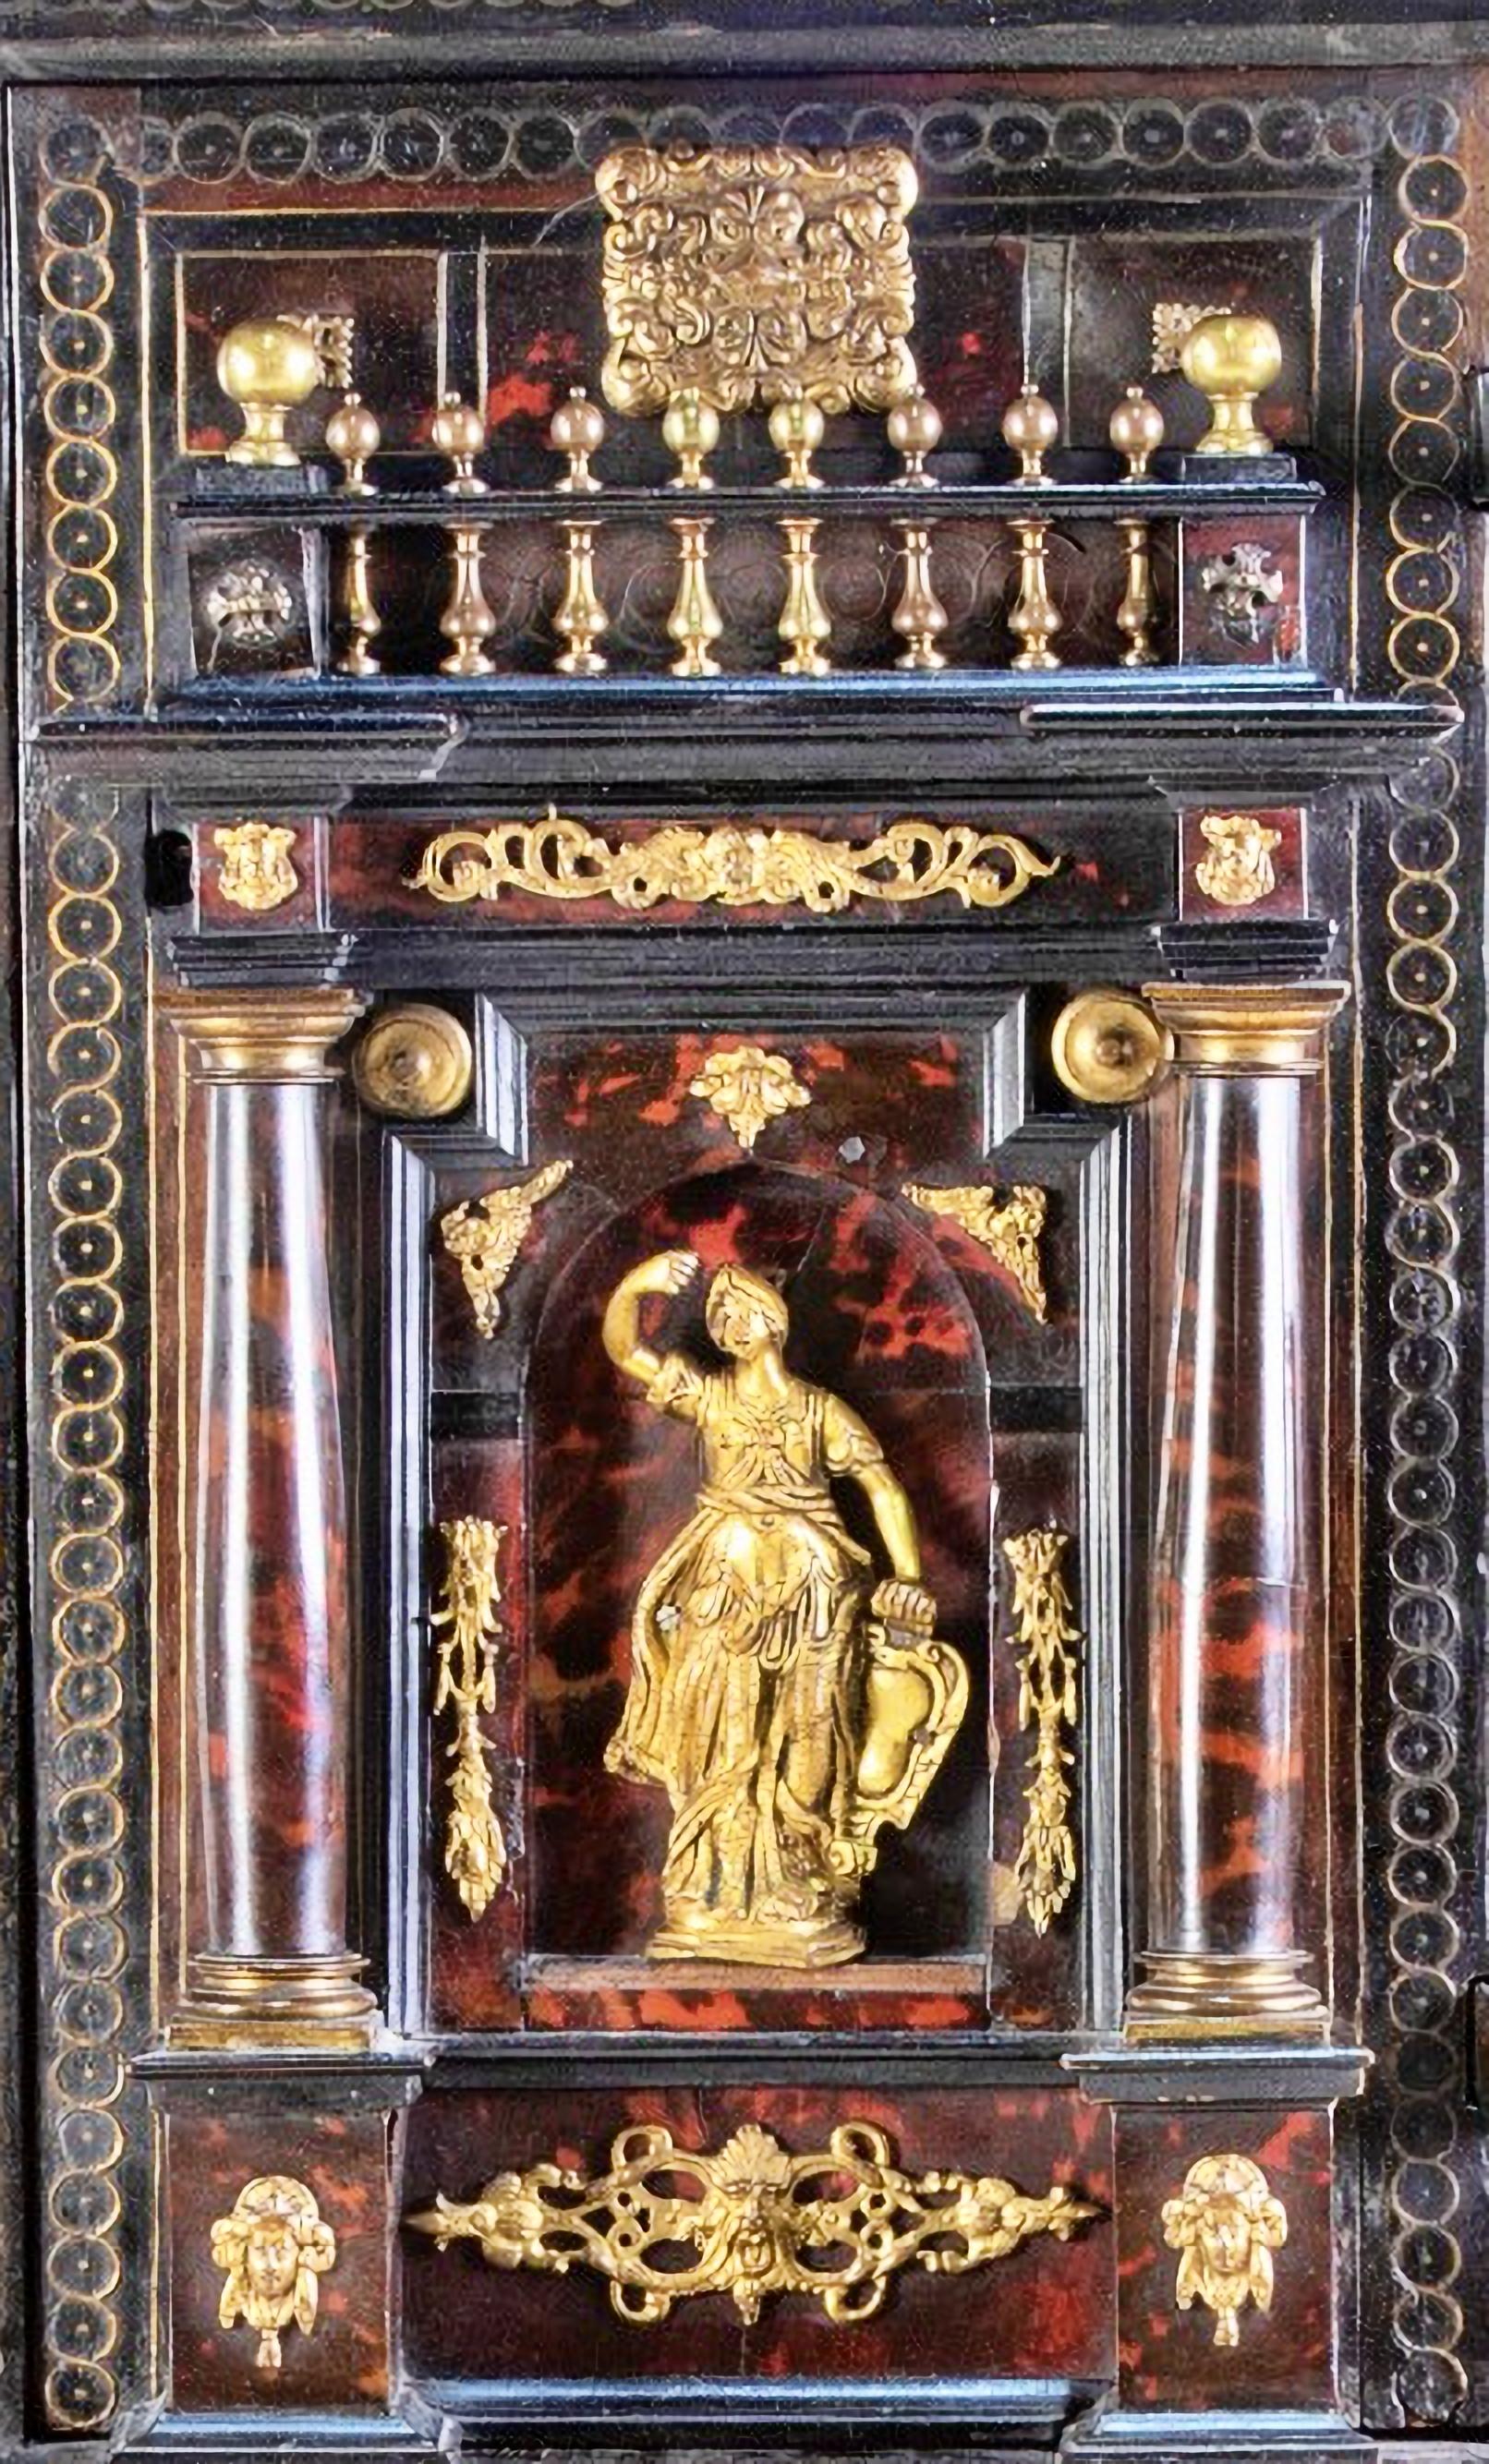 Hand-Crafted Important Spanish-Flemish Cabinet 17th Century